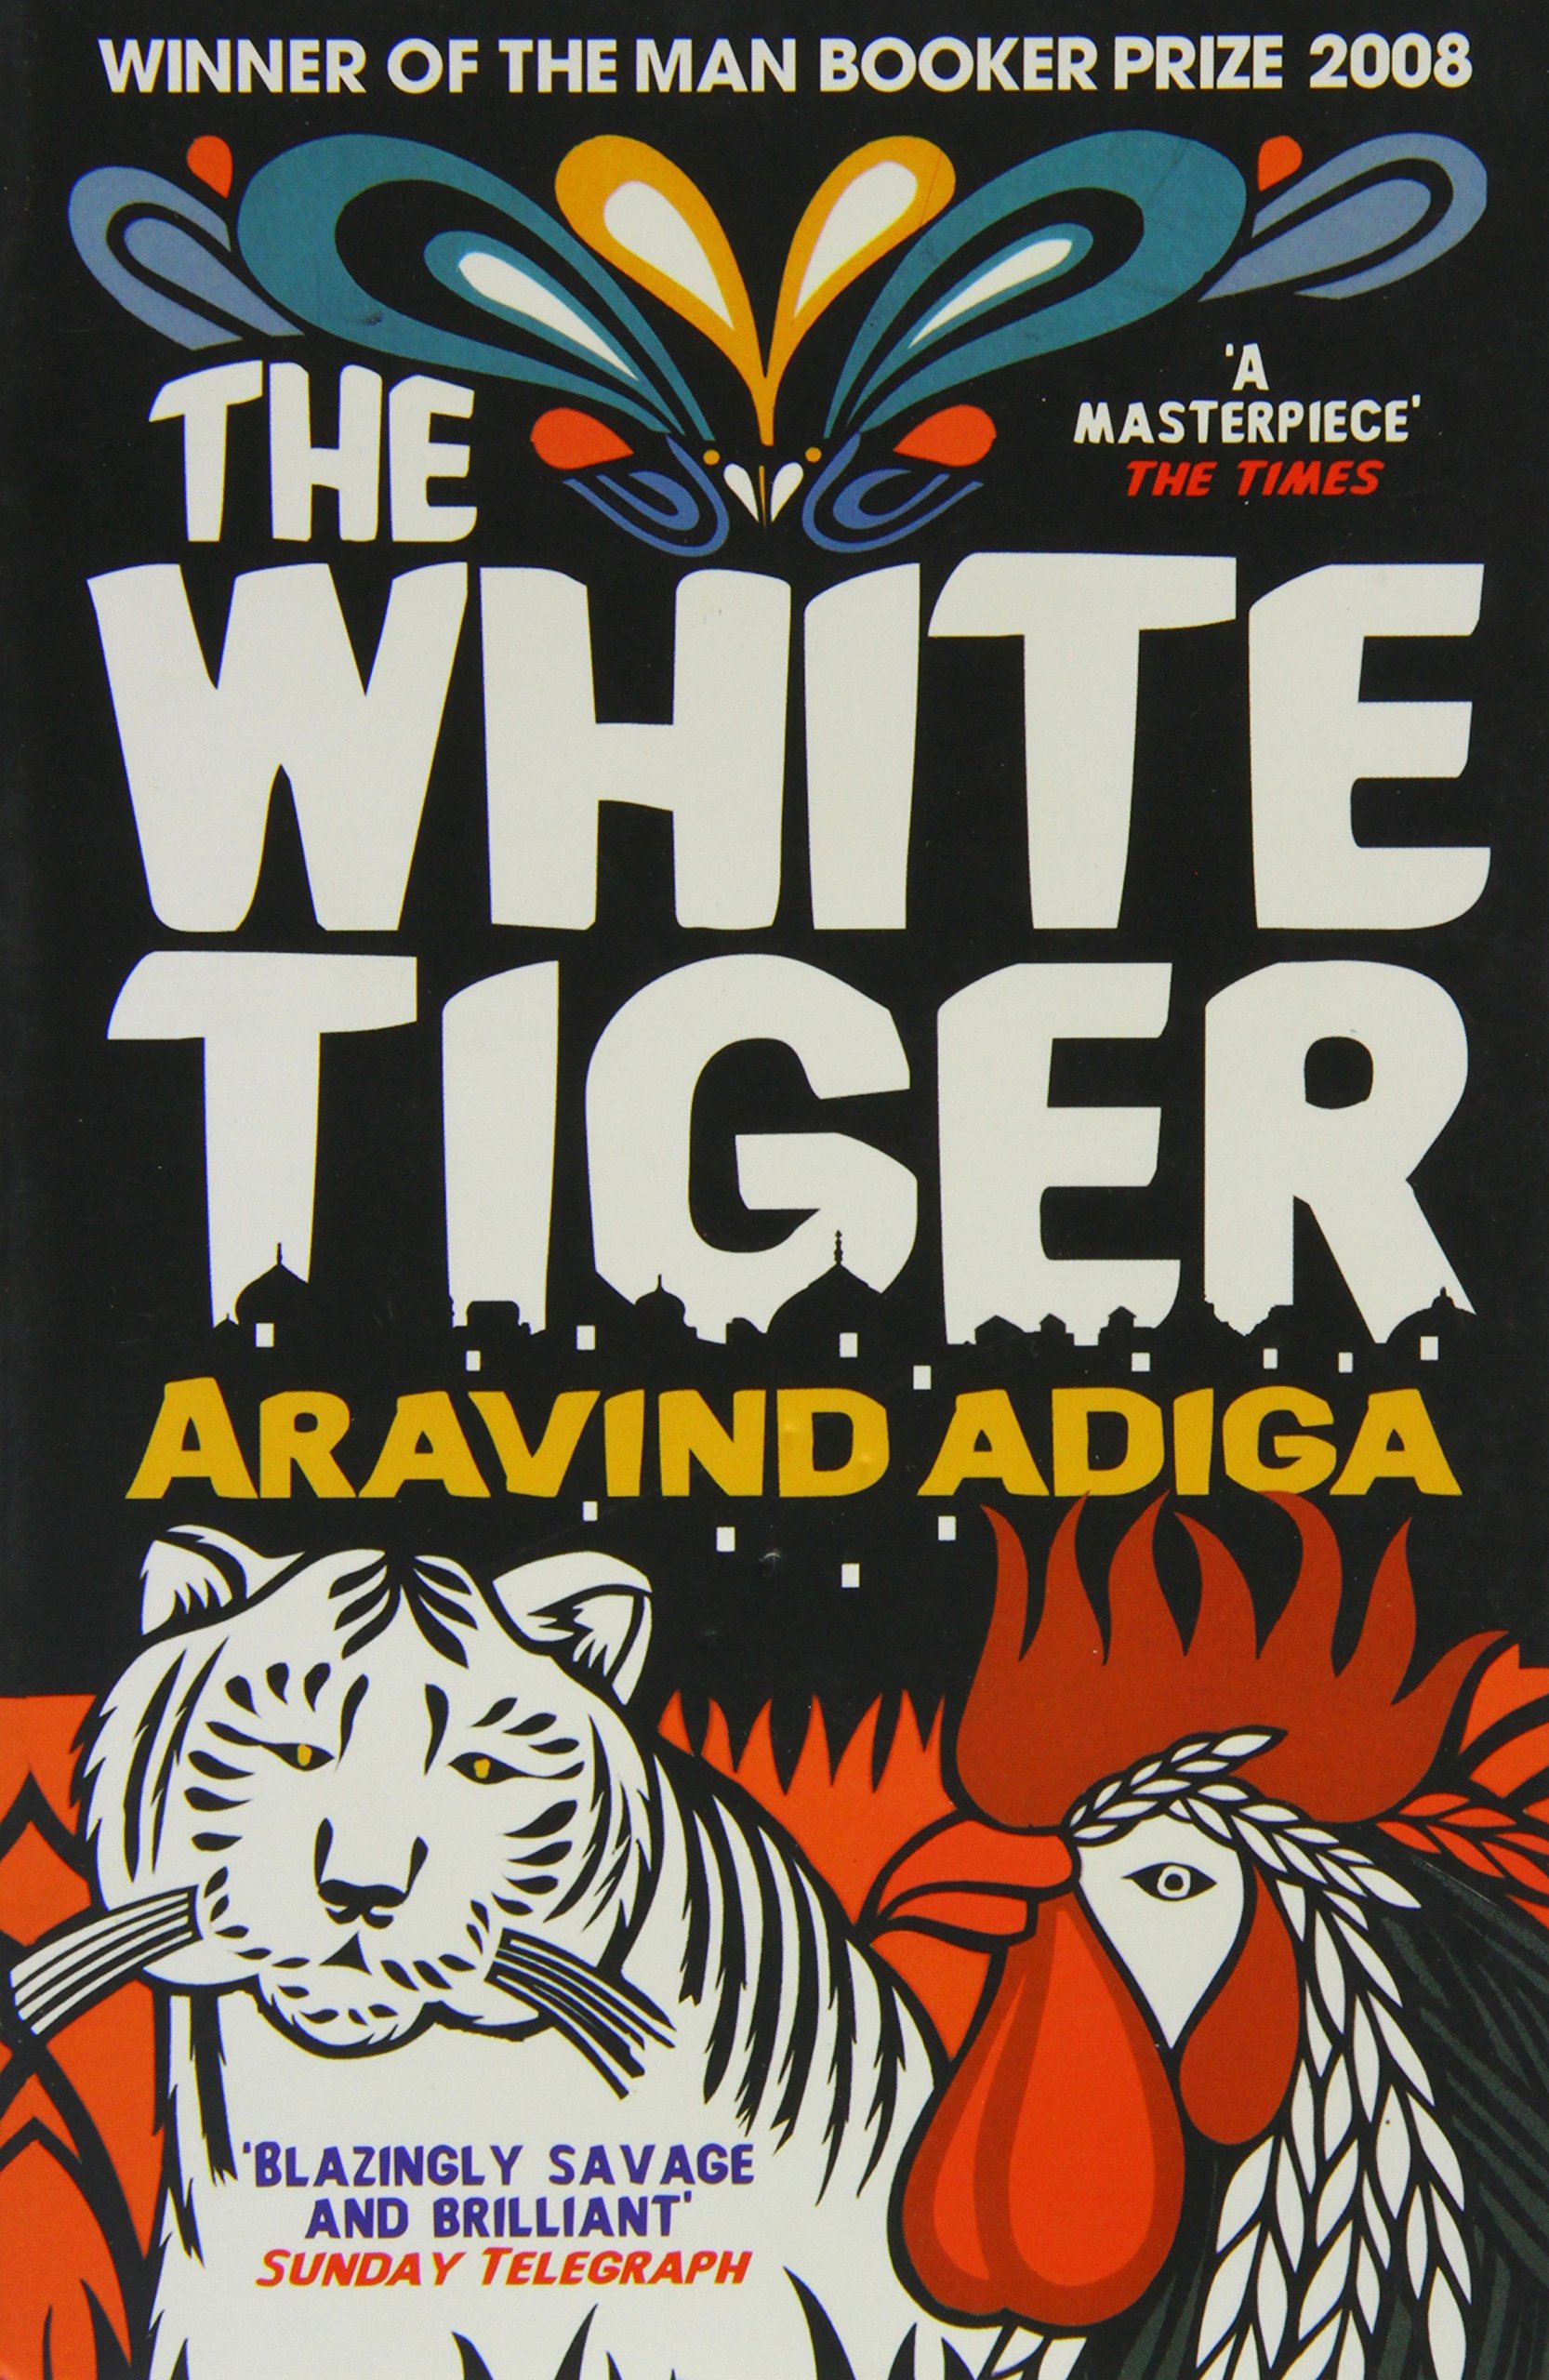 Cover page of The White Tiger